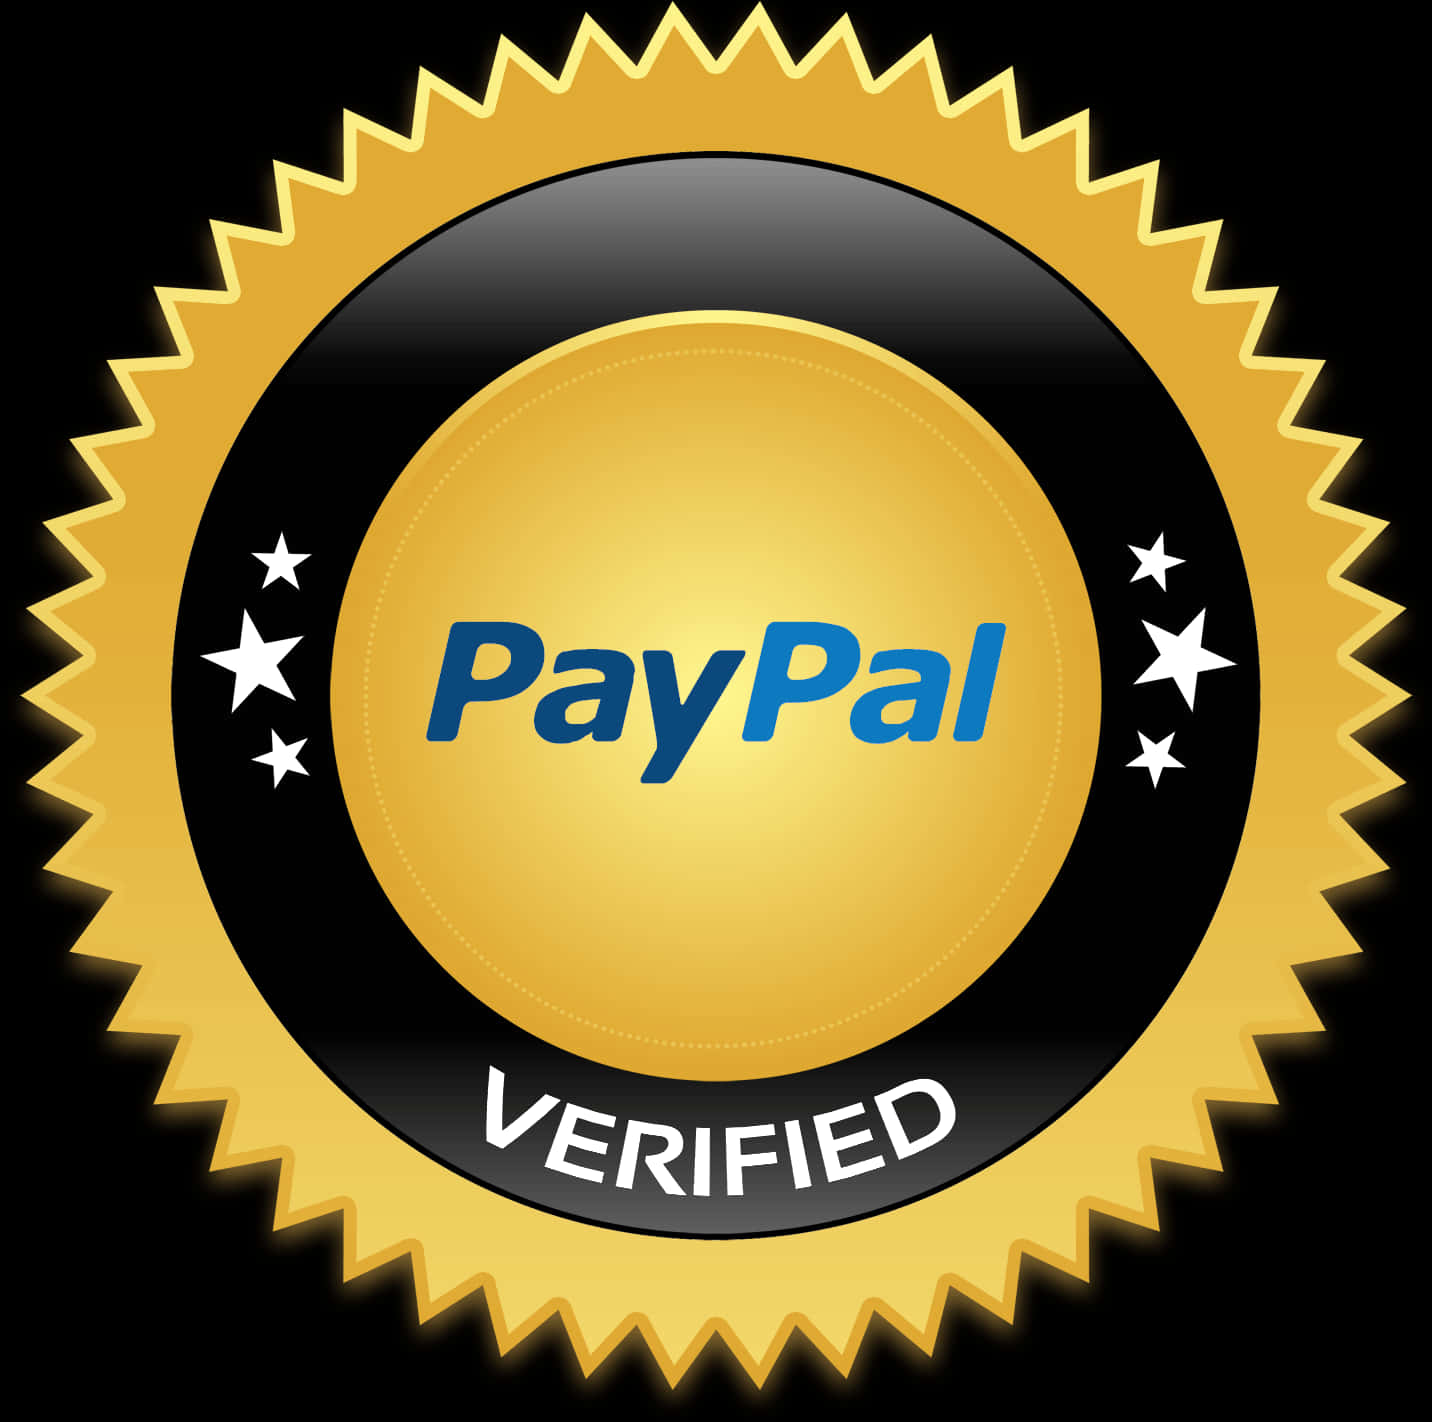 Pay Pal Verified Seal Graphic PNG image